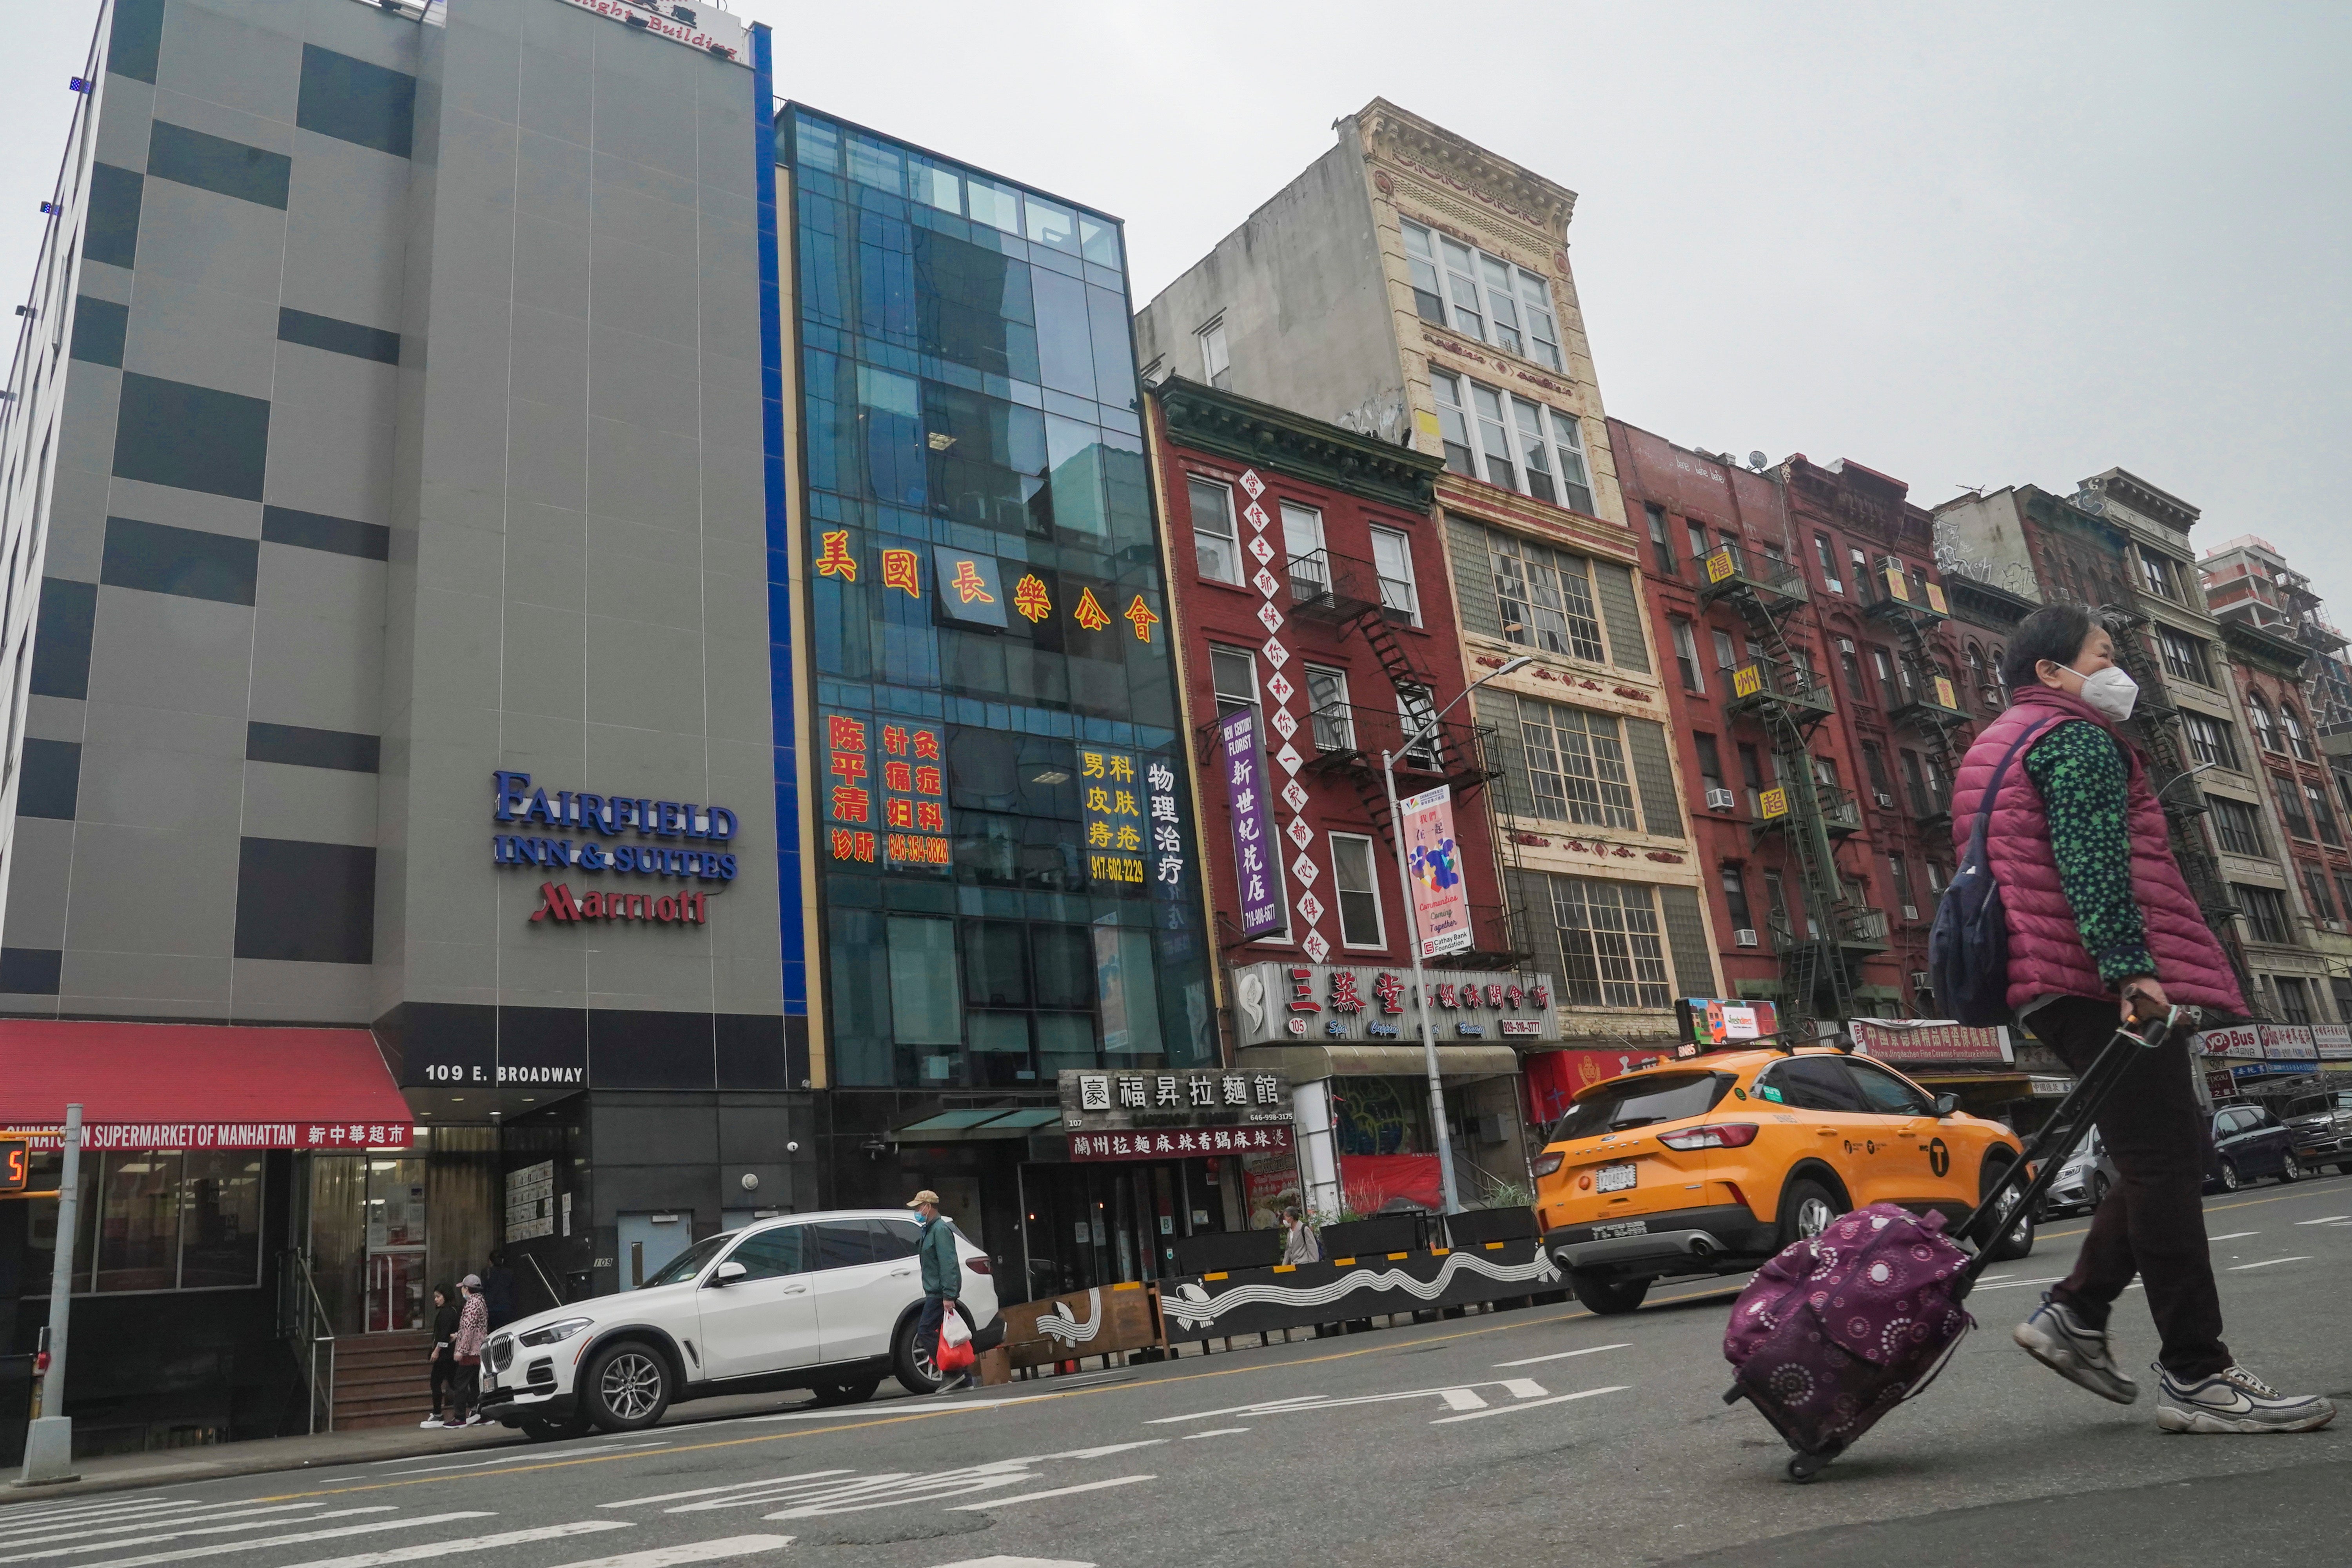 A six storey glass facade building, second from left, believed to be the site of a Chinese police outpost in New York City's Chinatown district